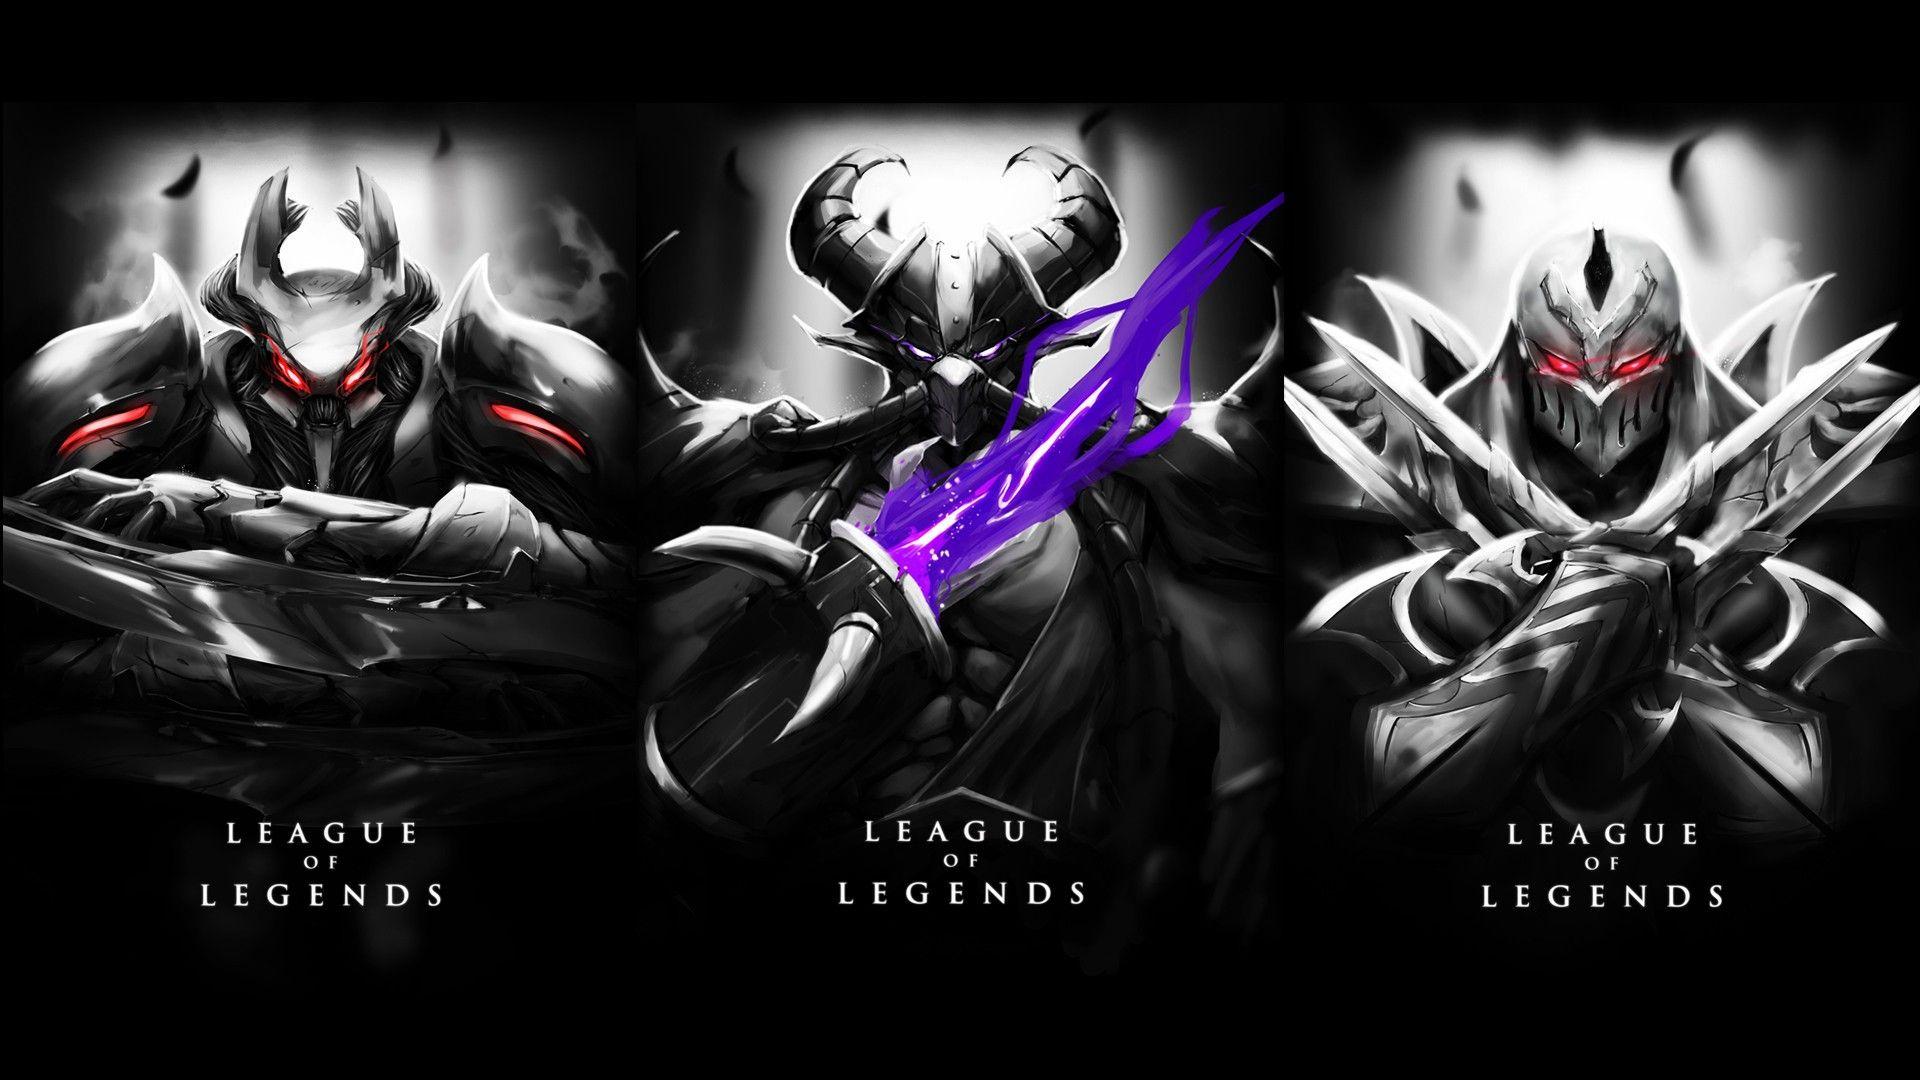 Embracing Immense Power  Nocturne Wallpaper  rnocturnemains